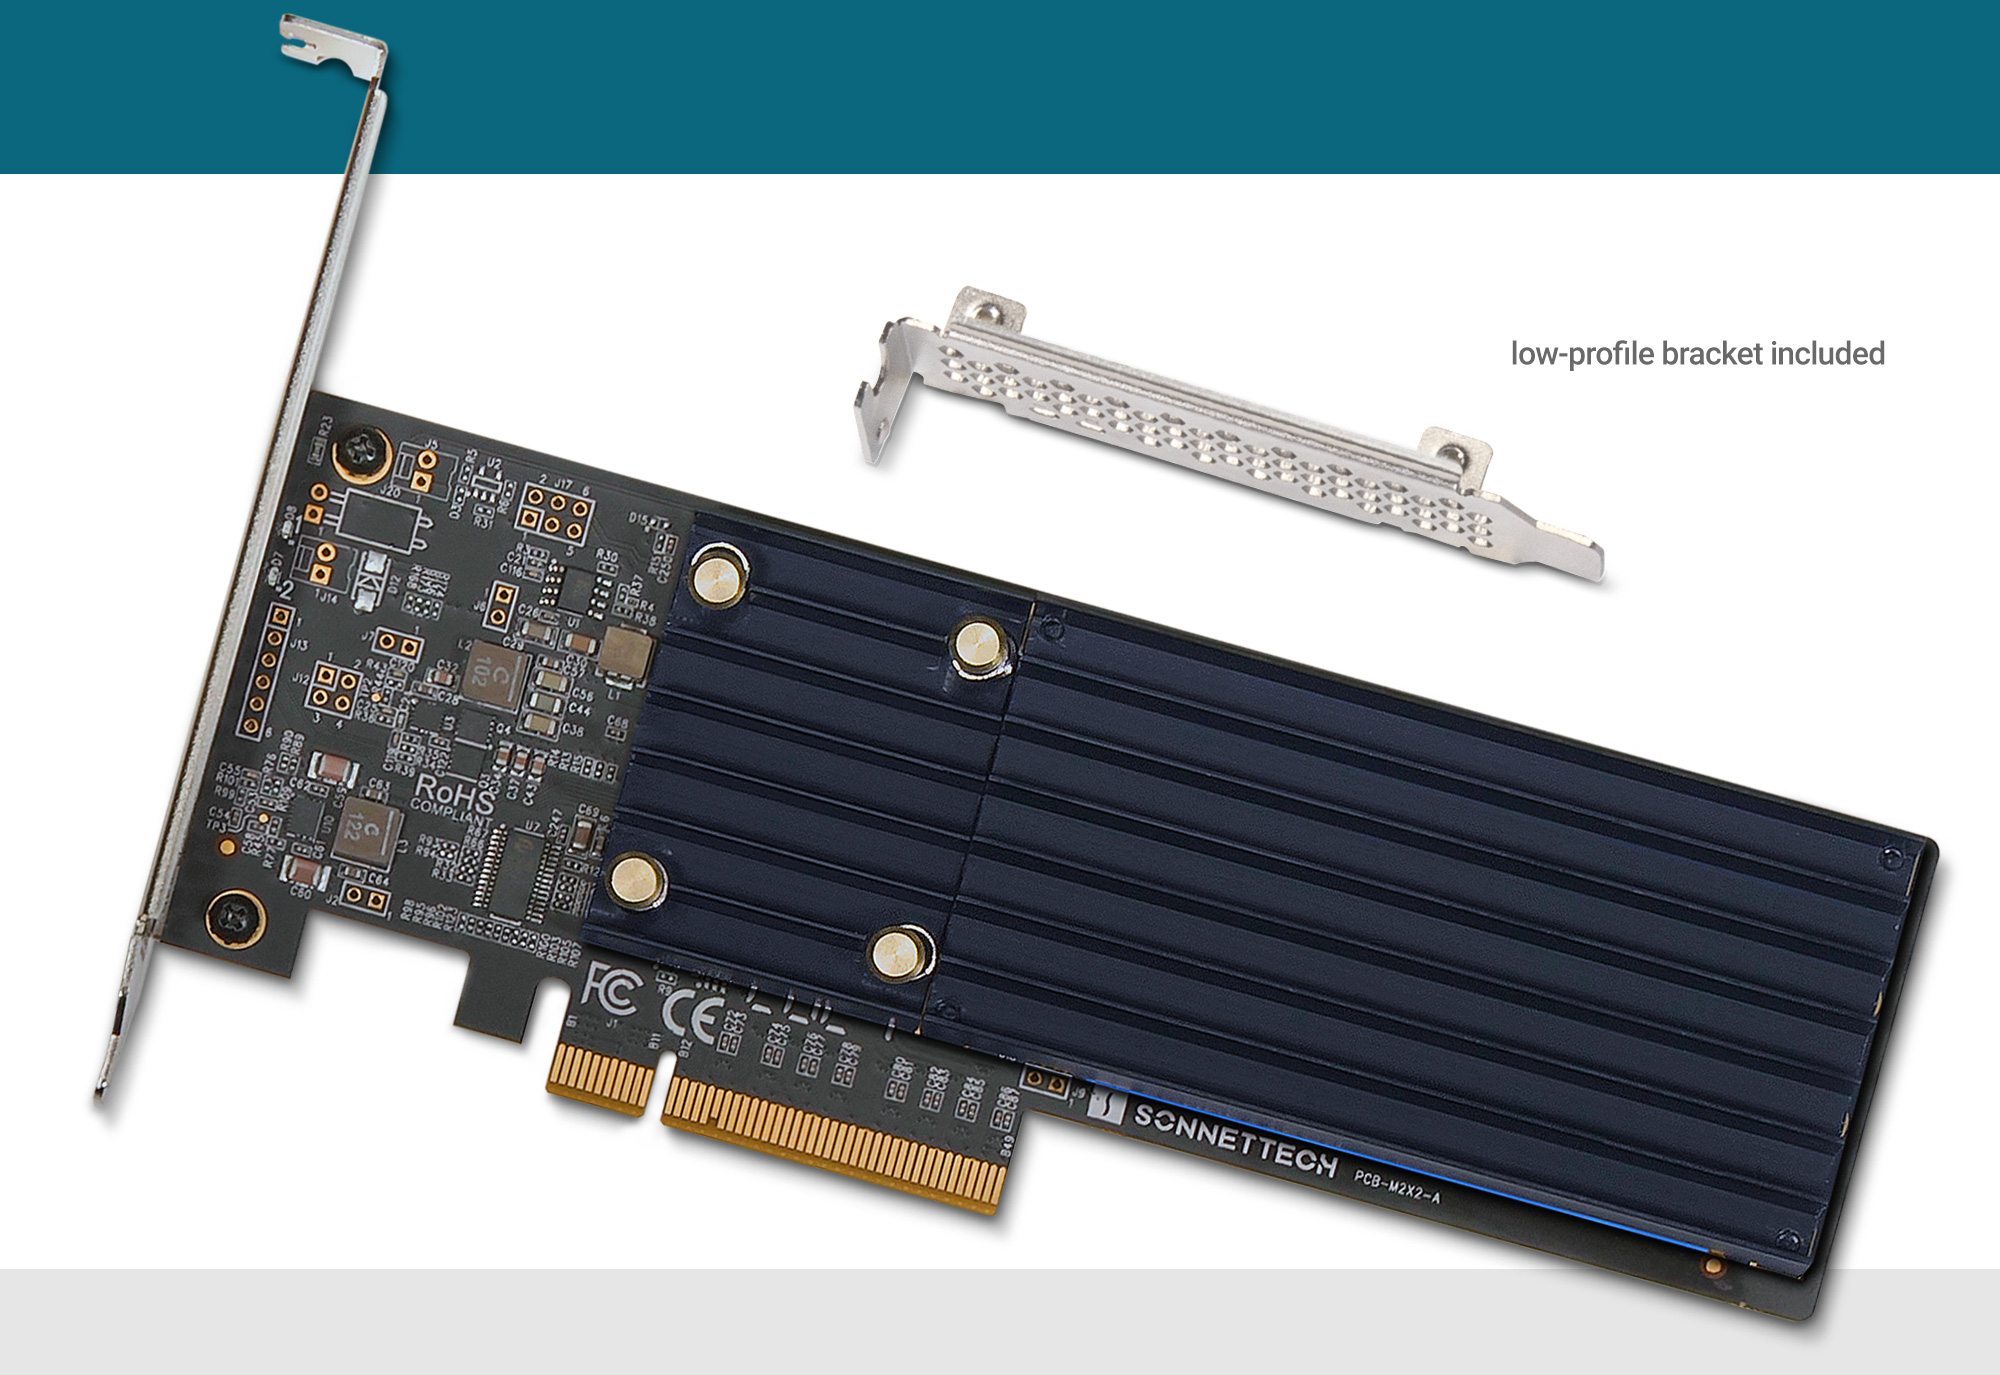 Overhead View of Sonnet M.2 2x4 PCIe Card Along with Included Low-profile Bracket